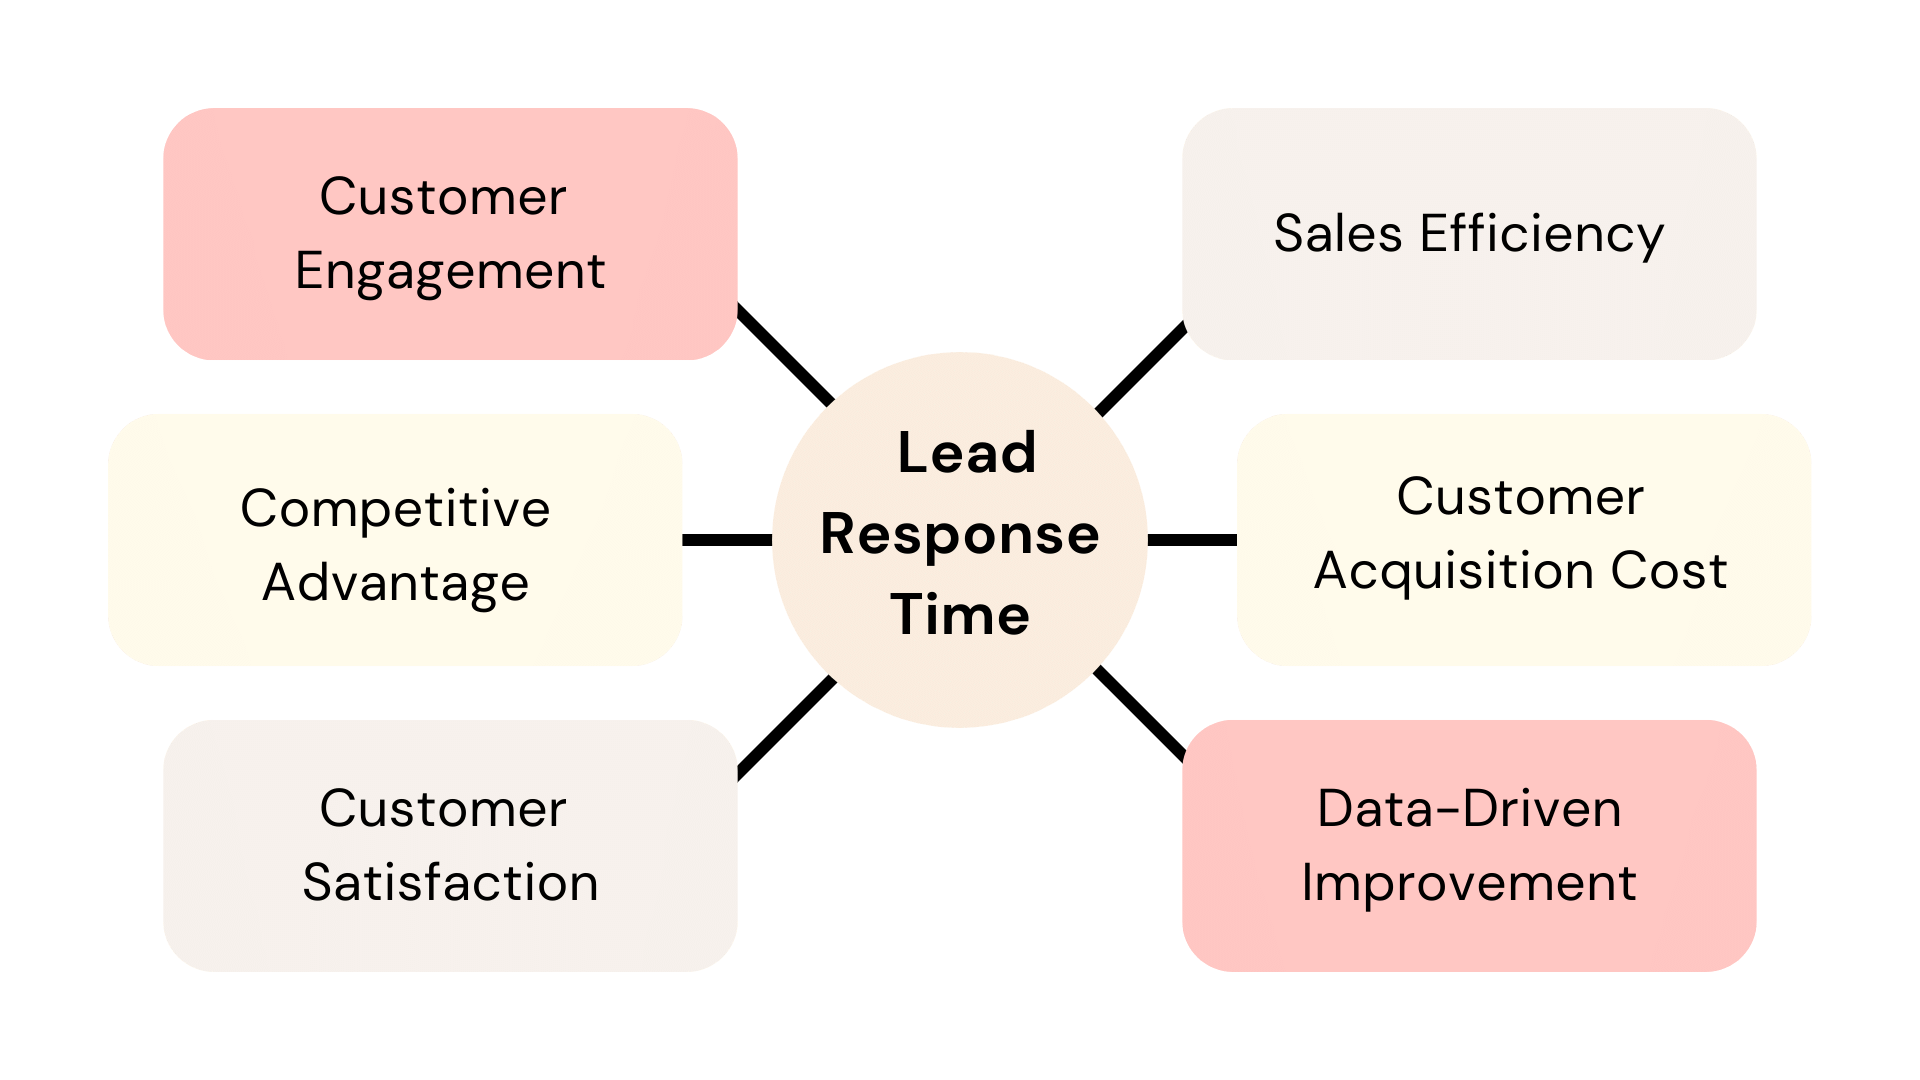 Lead Response Time